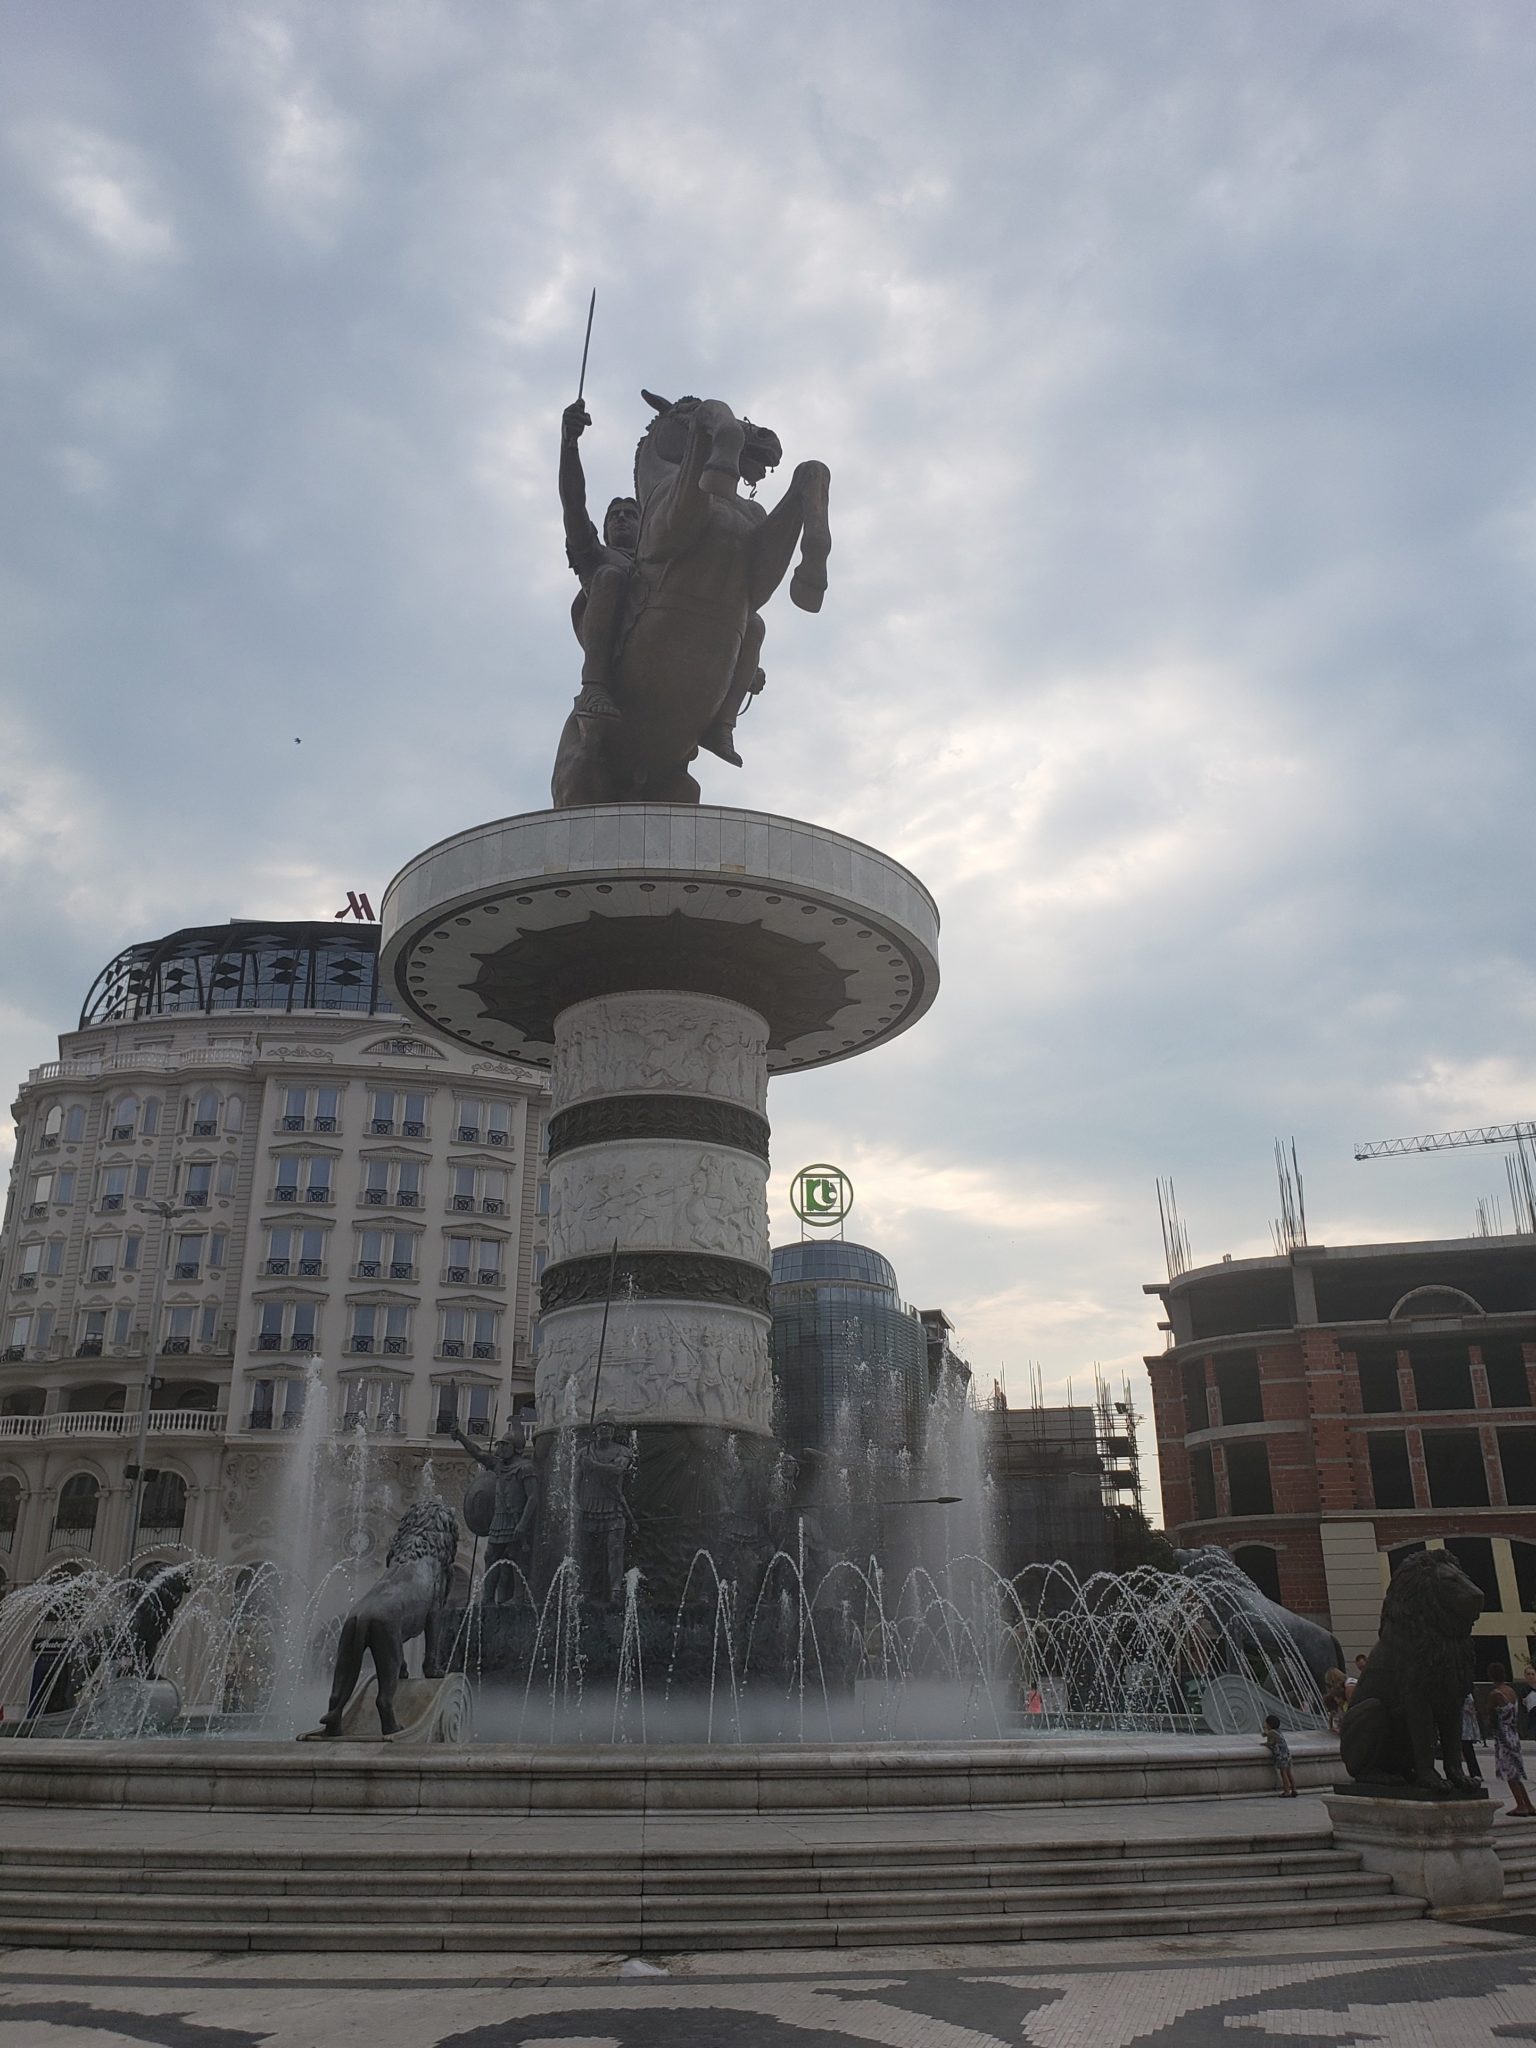 a statue of a horse riding on a pedestal with a fountain in front of buildings